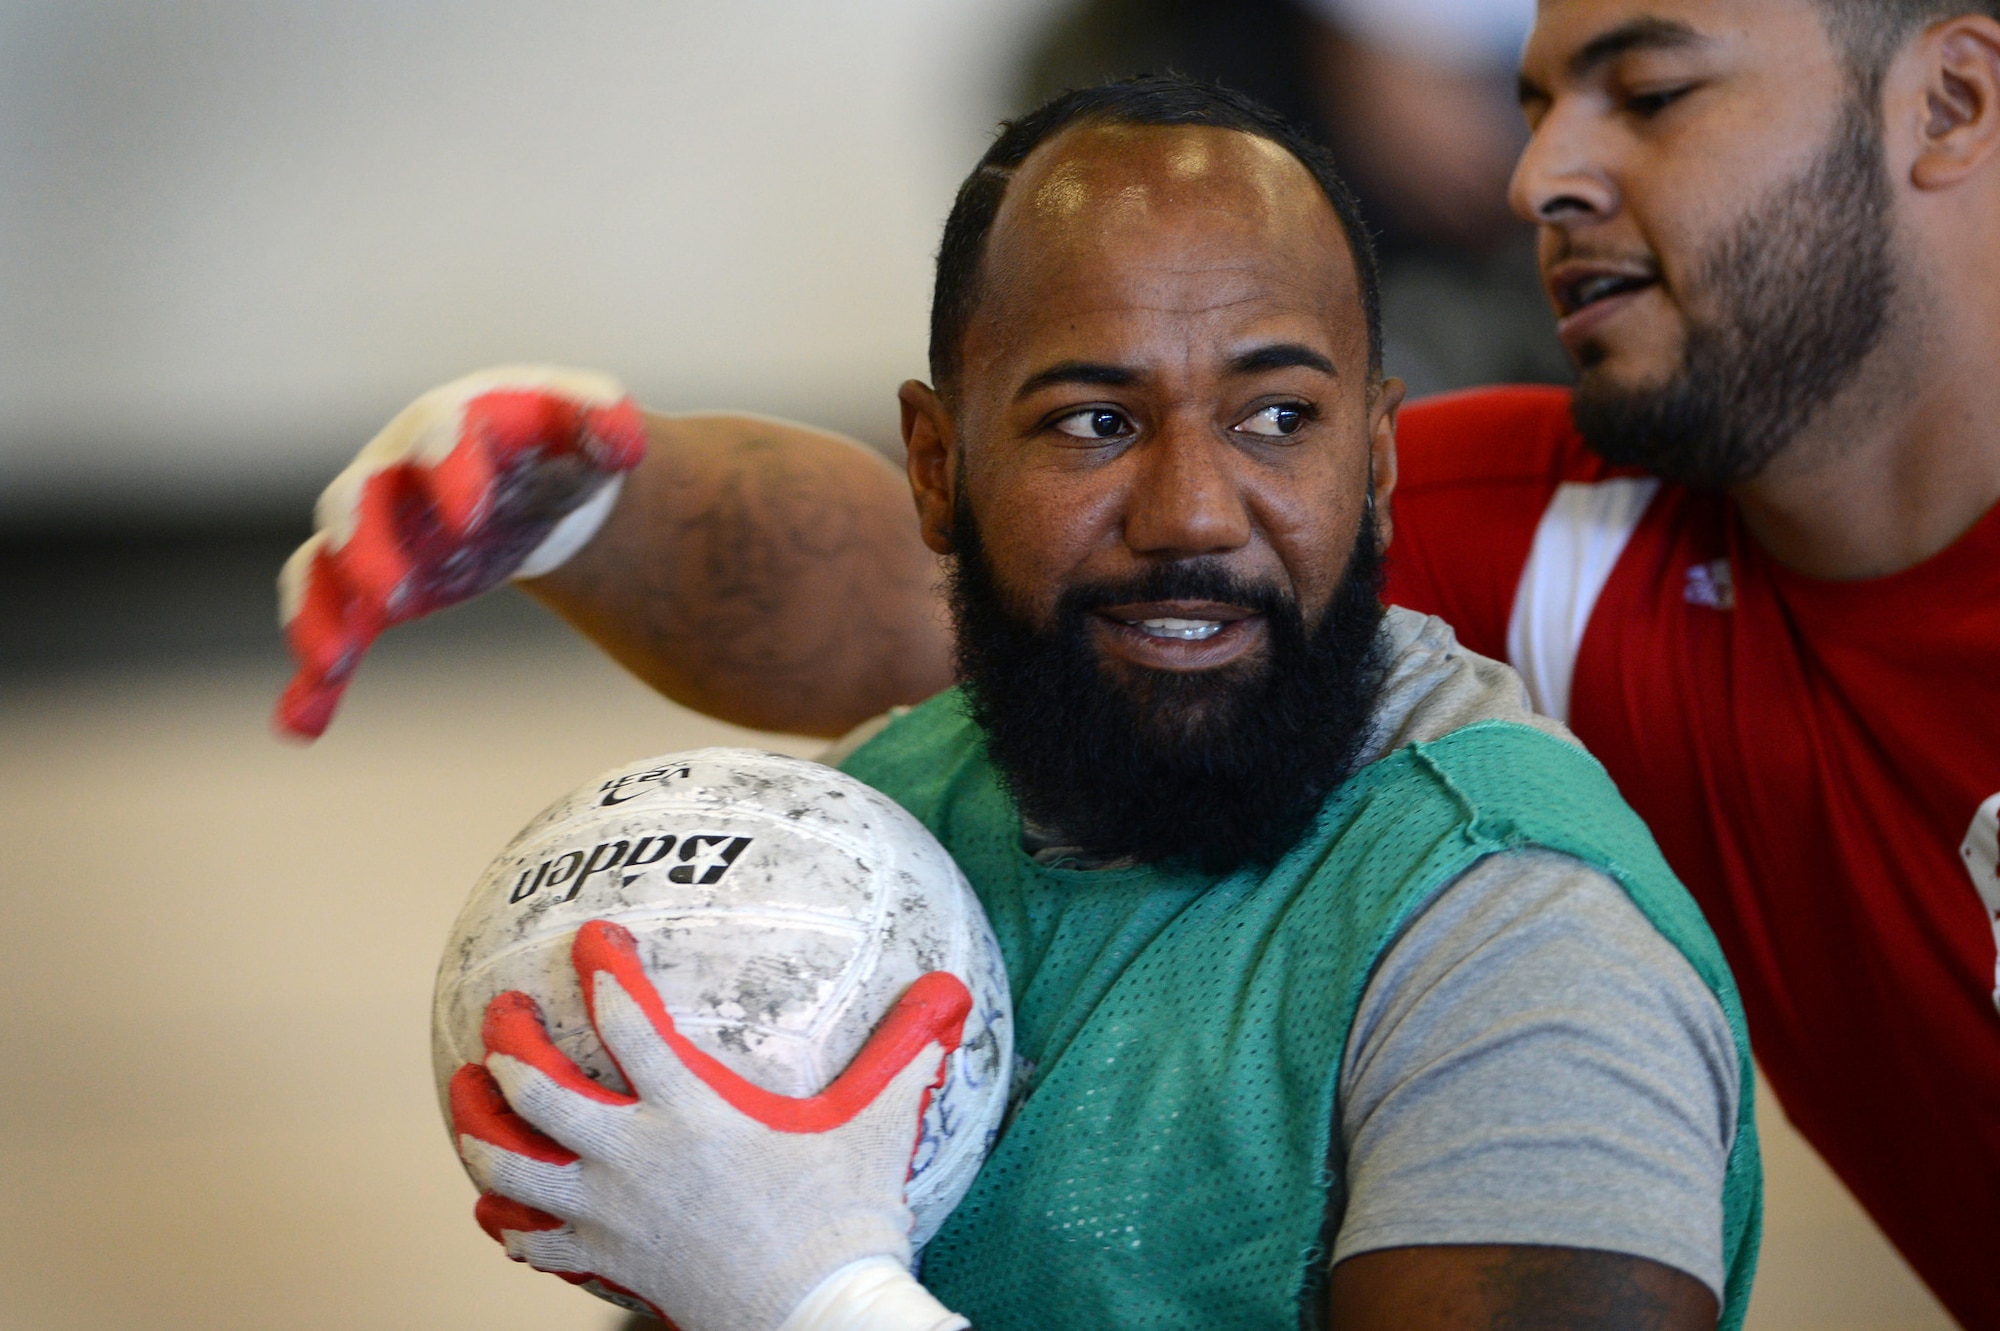 A wounded warrior protects the ball during the  Warrior CARE Month’s Joint Services Wheelchair Rugby Exhibition at Joint Base Andrews, Md., Nov. 16, 2015. (Defense Department photo/Marvin Lynchard)